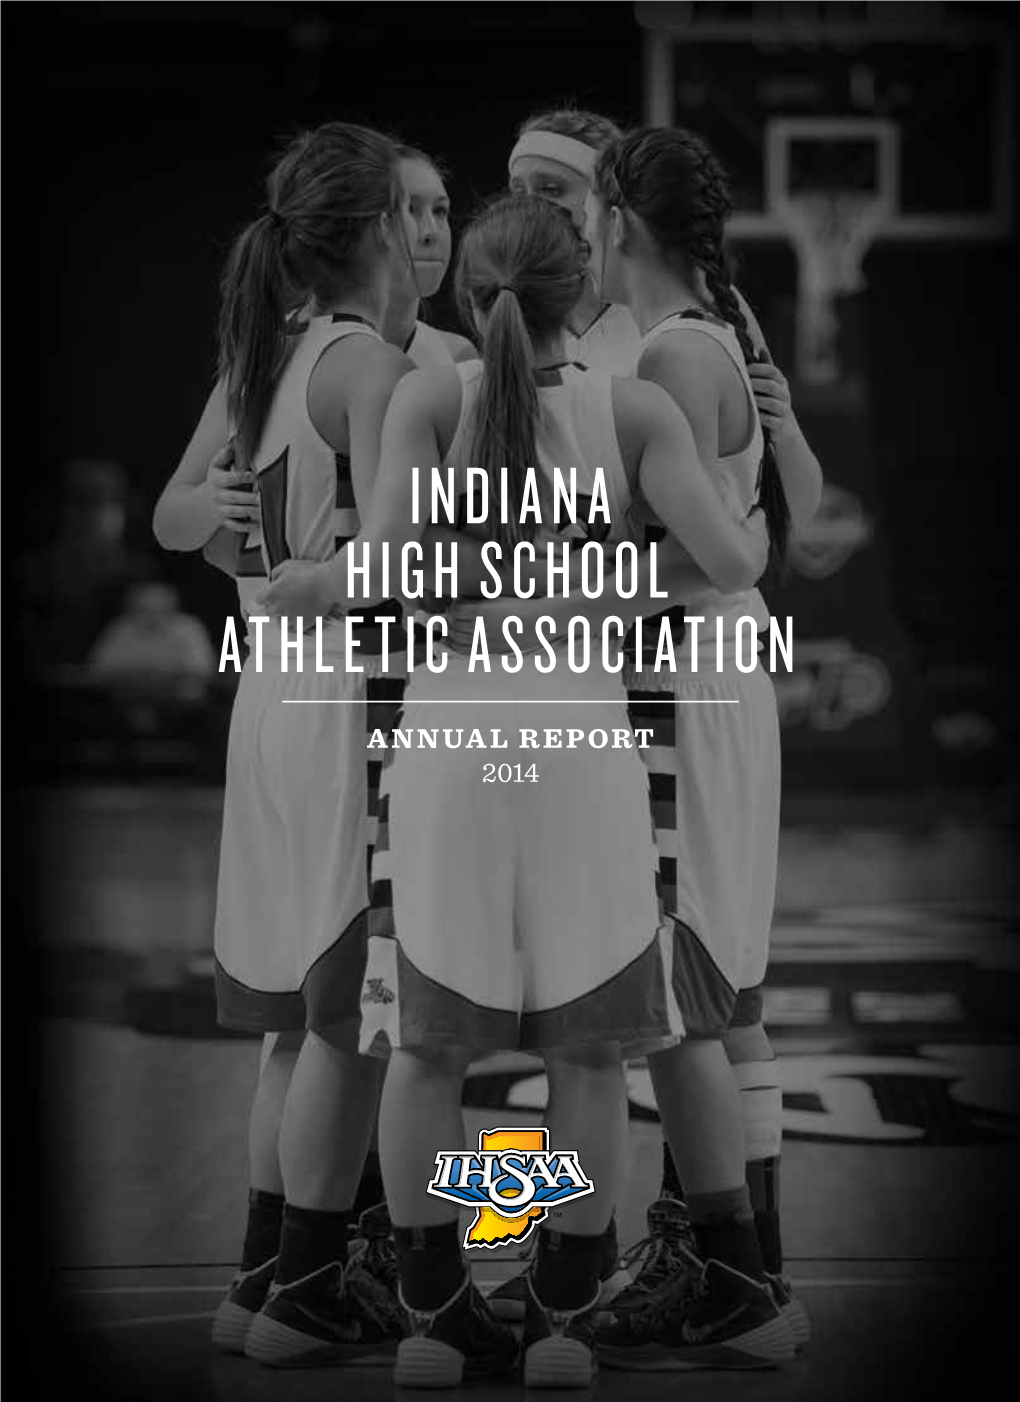 To Provide Wholesome, Educational Athletics for the Secondary Schools of Indiana